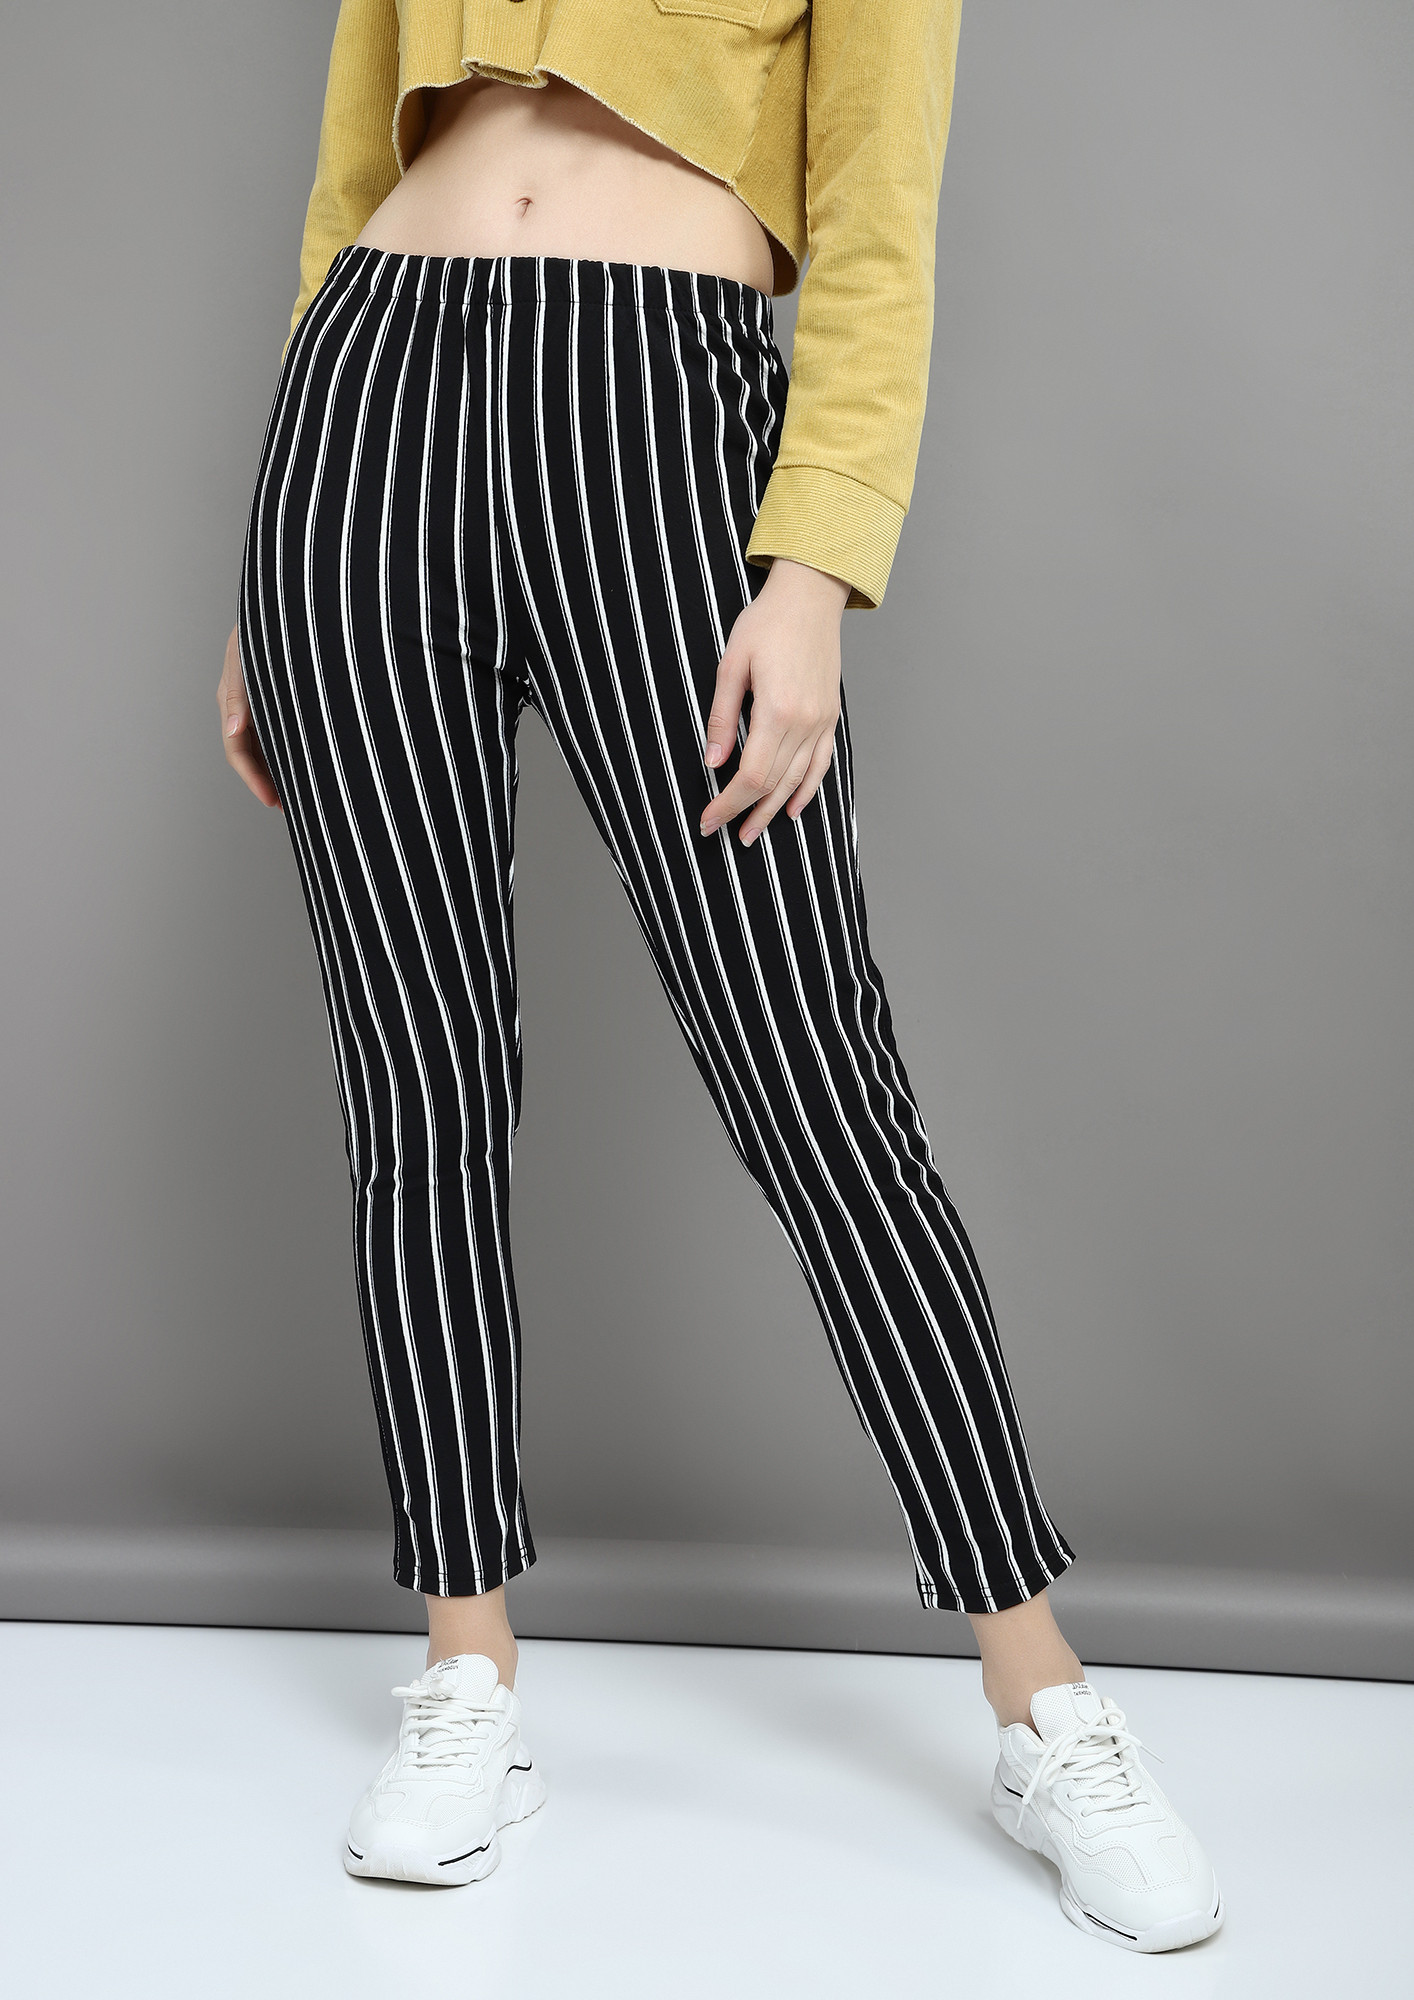 Buy striped pants for women cotton in India @ Limeroad